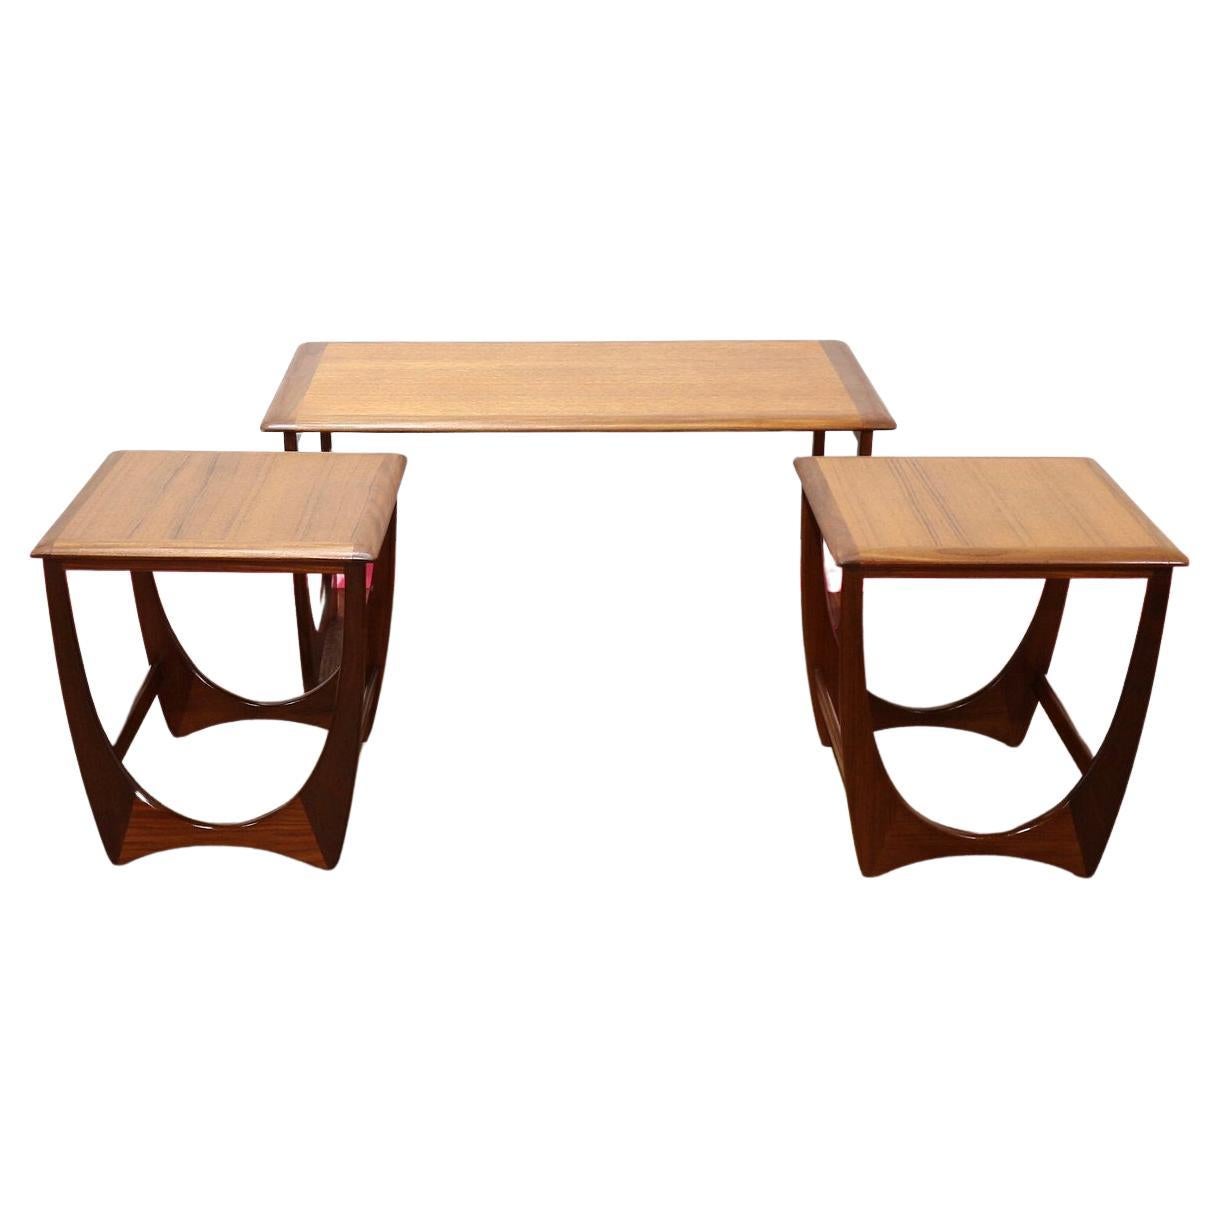 A beautiful set of nesting tables by British furniture maker G plan as part odf there astro range. Gorgeous grained tops and solid wood legs make these tables stand out from the crowd.

 

Dimensions 

Large table w39 d29.5 h20.5

Small